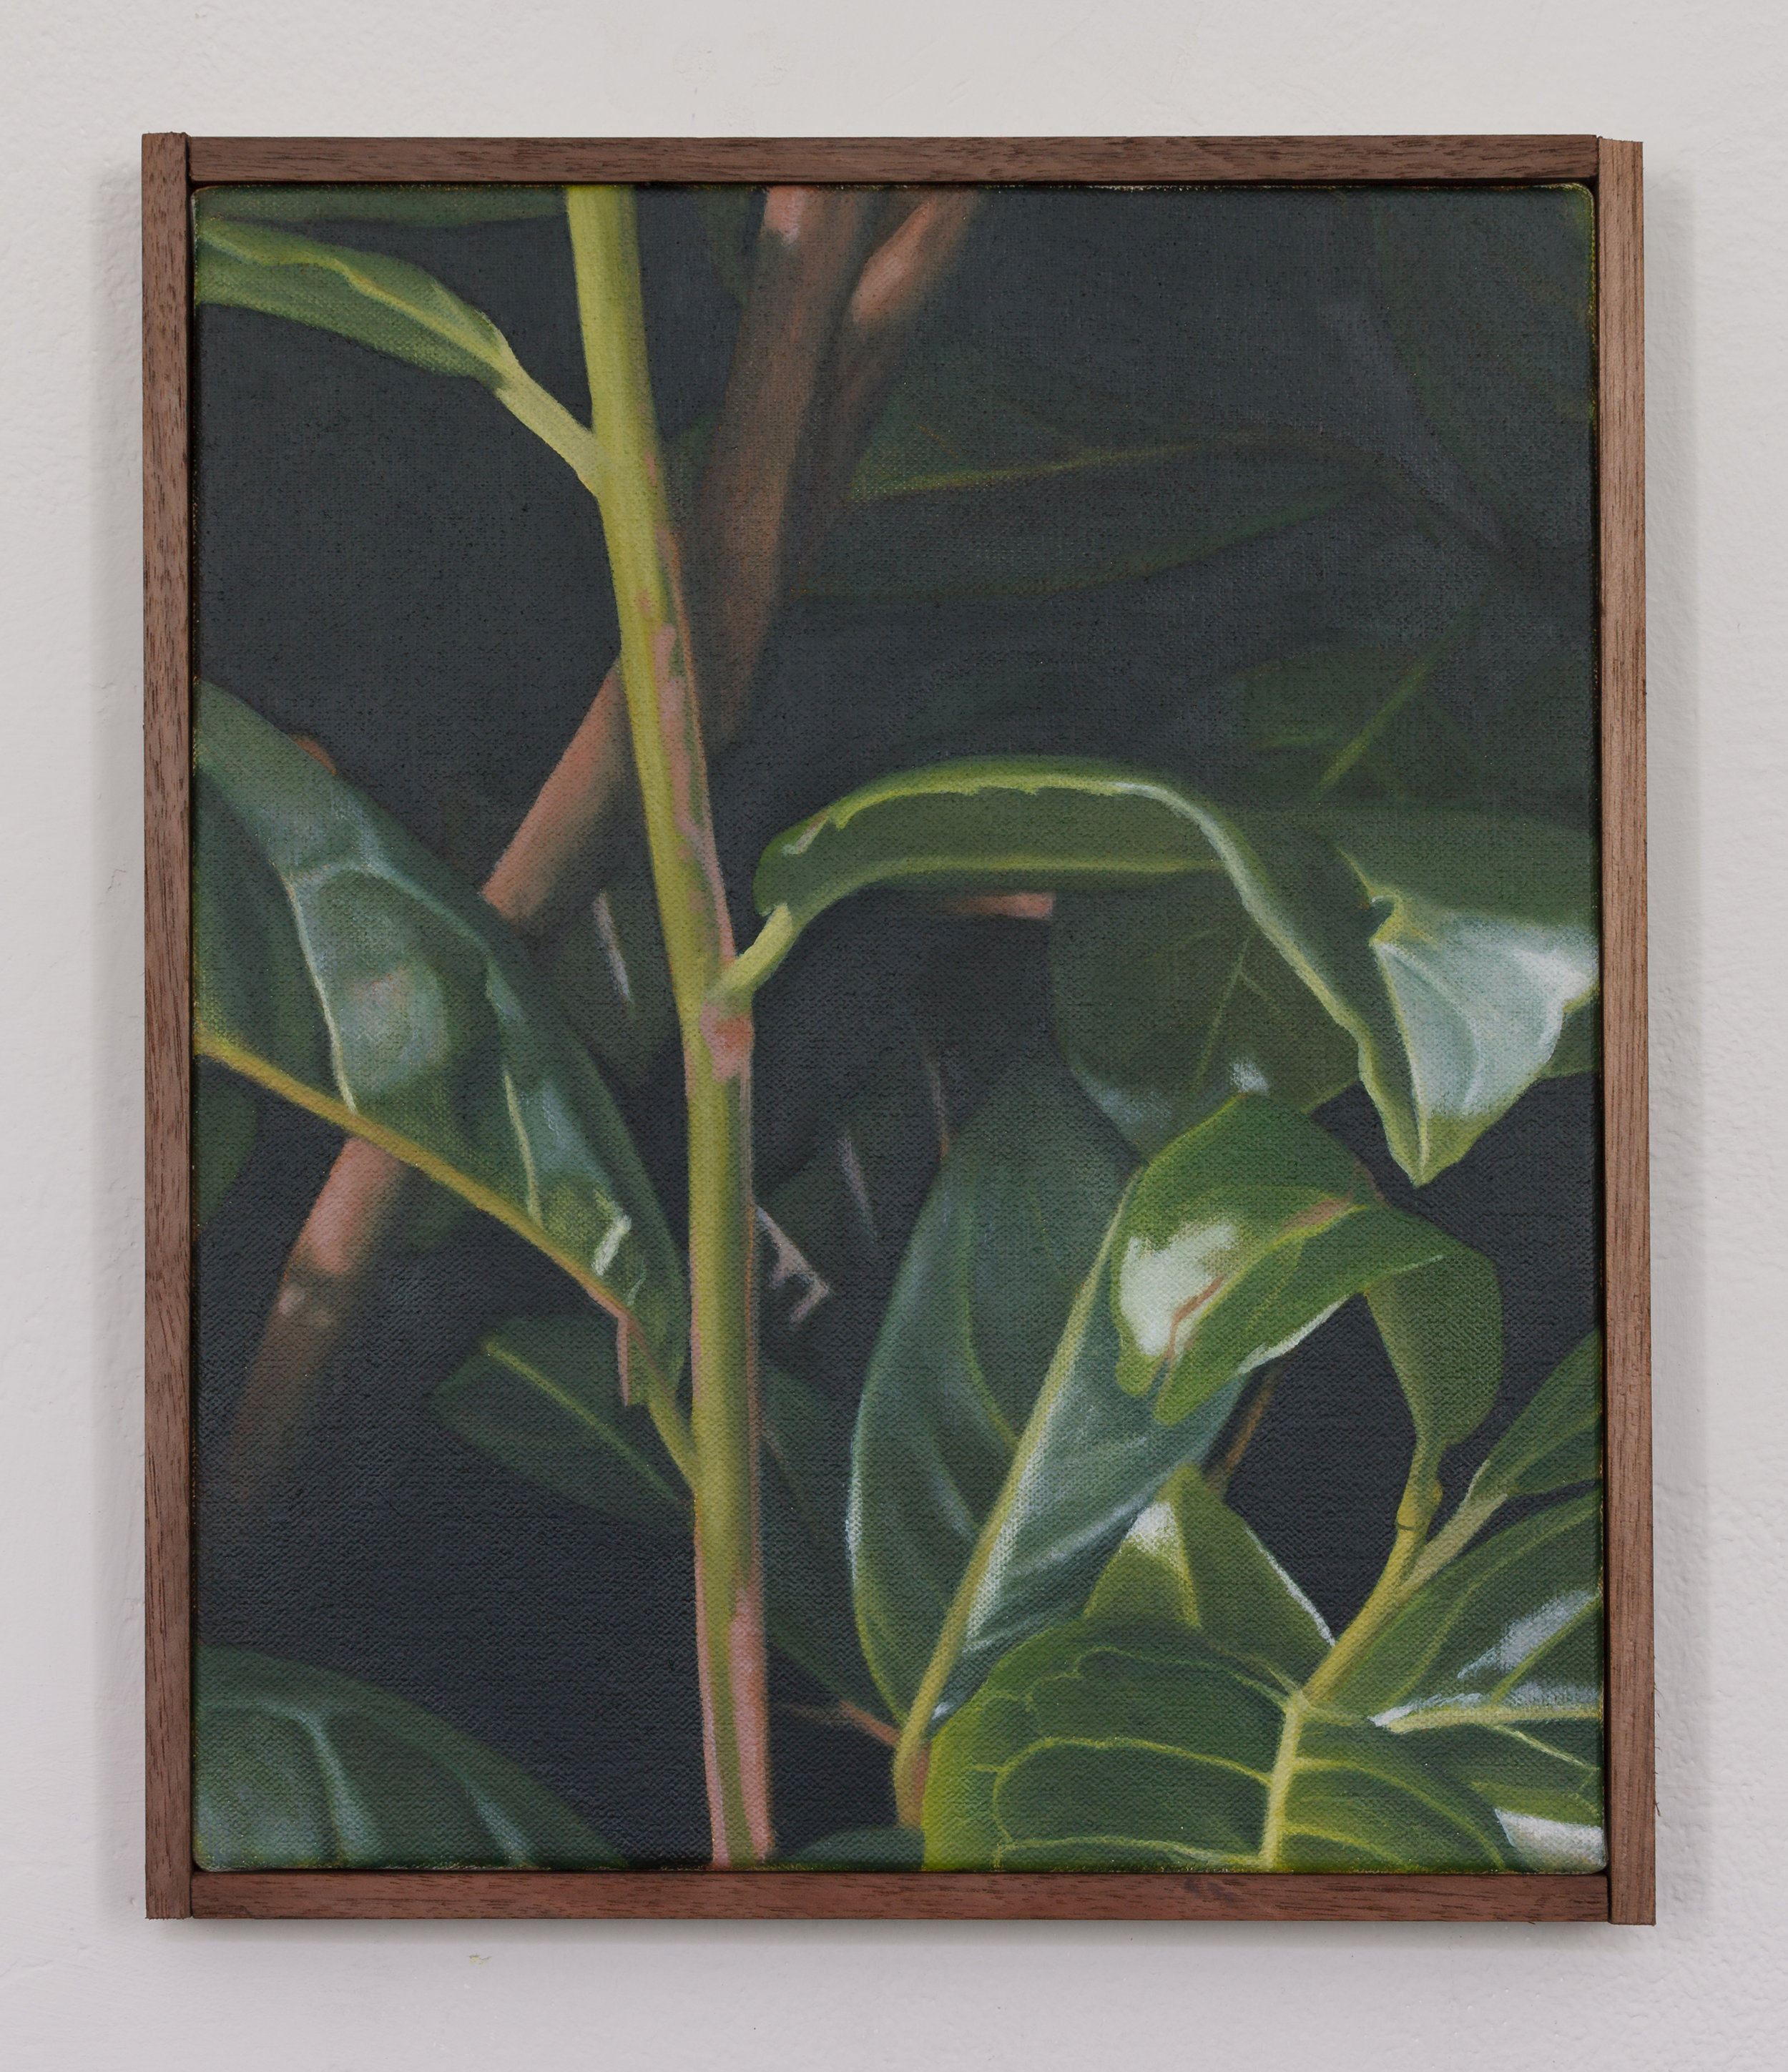  Laurel | 2018 | oil on linen | Mahogany frame | 31 x 26 cm | 12.2 x 10.2 in | Private Collection | Photo by Lee Welch 